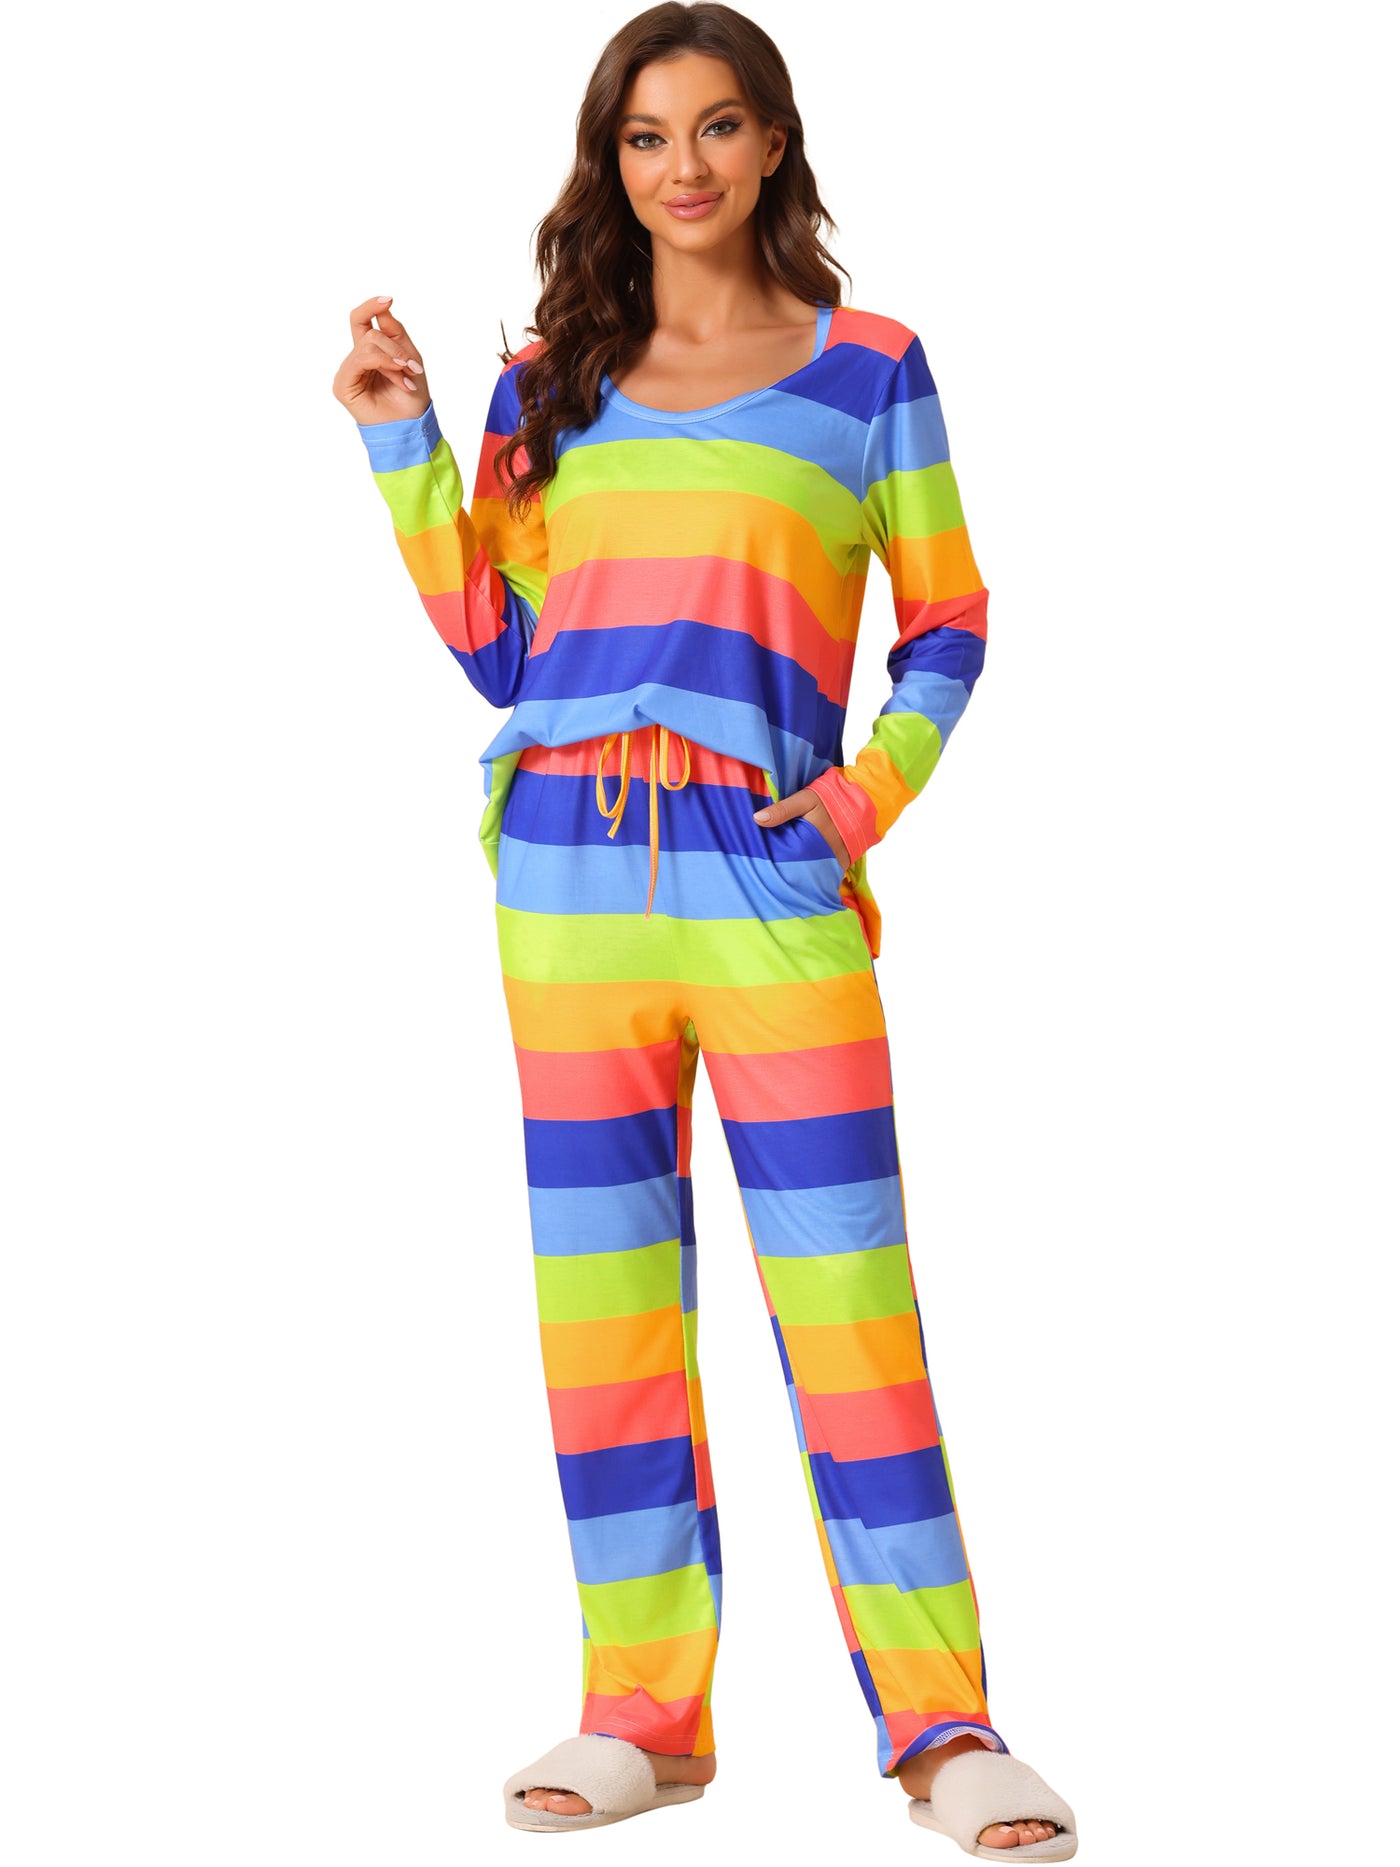 Bublédon Womens Lounge Cotton Outfits Rainbow Long Sleeves with Pants Stripe Pajama Set